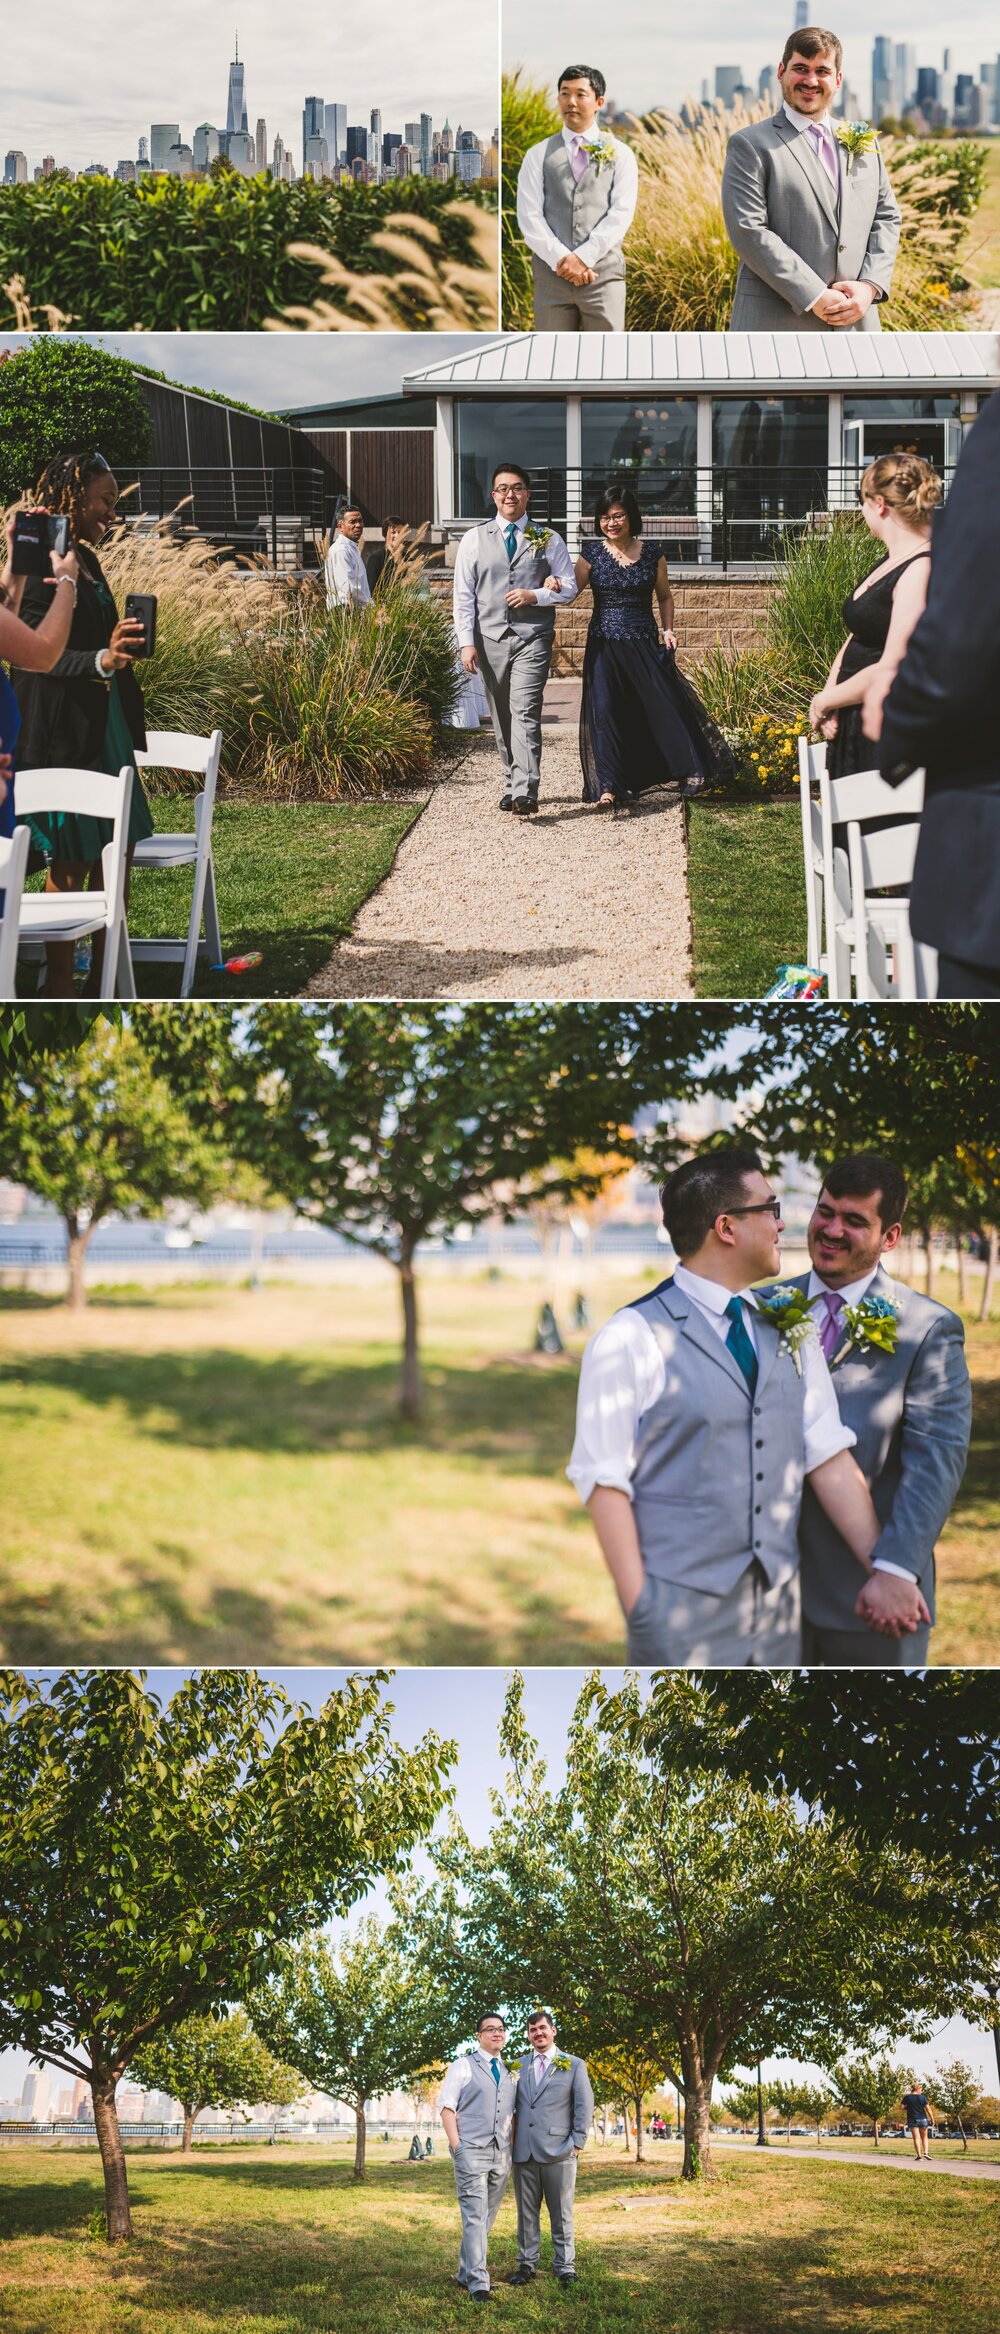  Scene's from Victor and Adam's New Jersey Wedding at the Liberty House Restaurant in Newark. Keep an yee out for scenes of the New York Skyline in the background! 